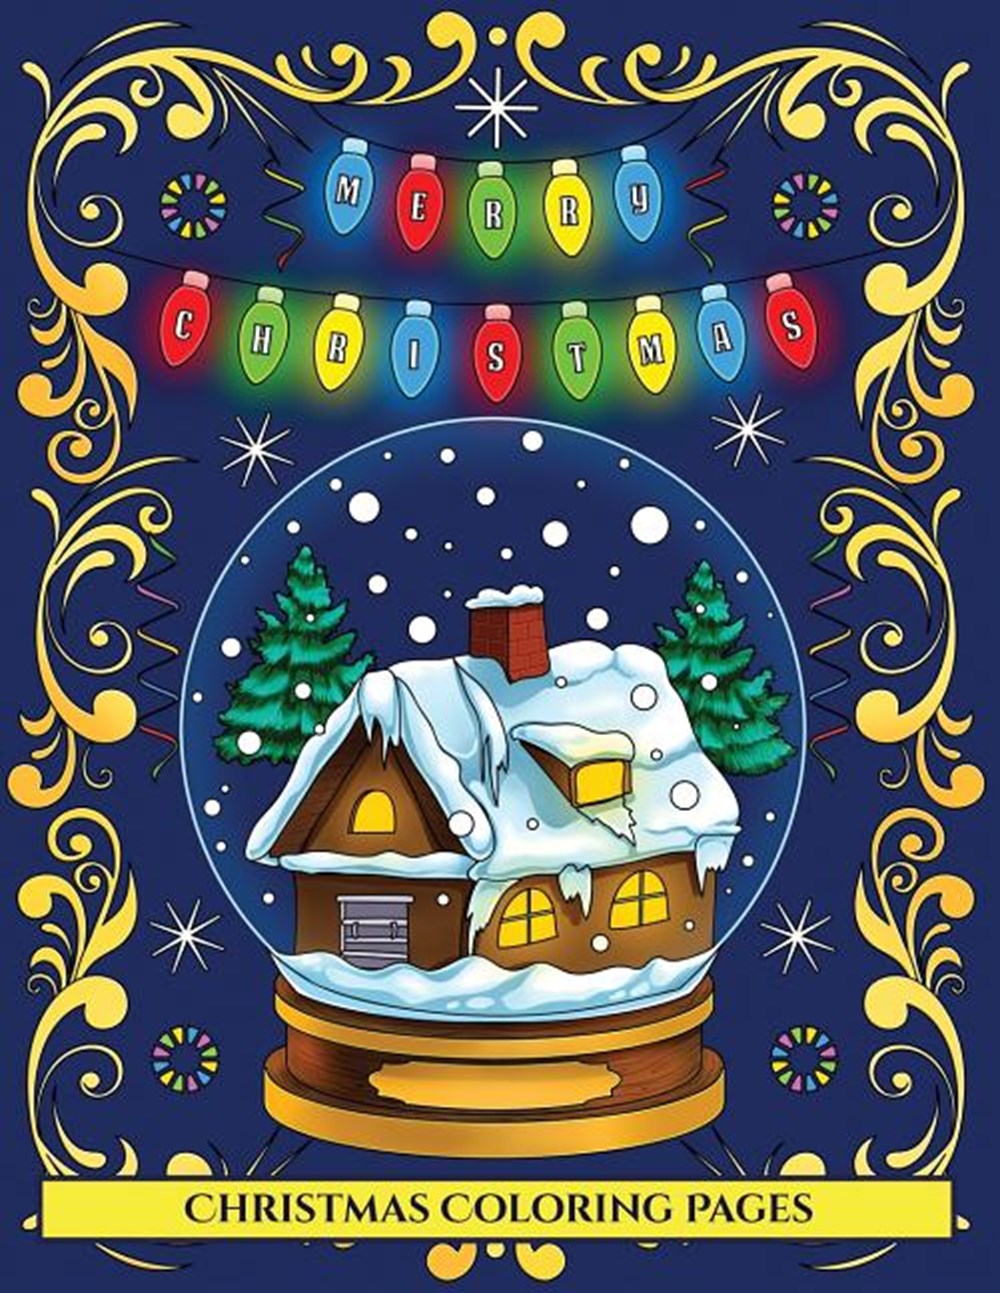 Christmas Coloring Pages: An adult coloring (colouring) book with 30 unique Christmas coloring pages